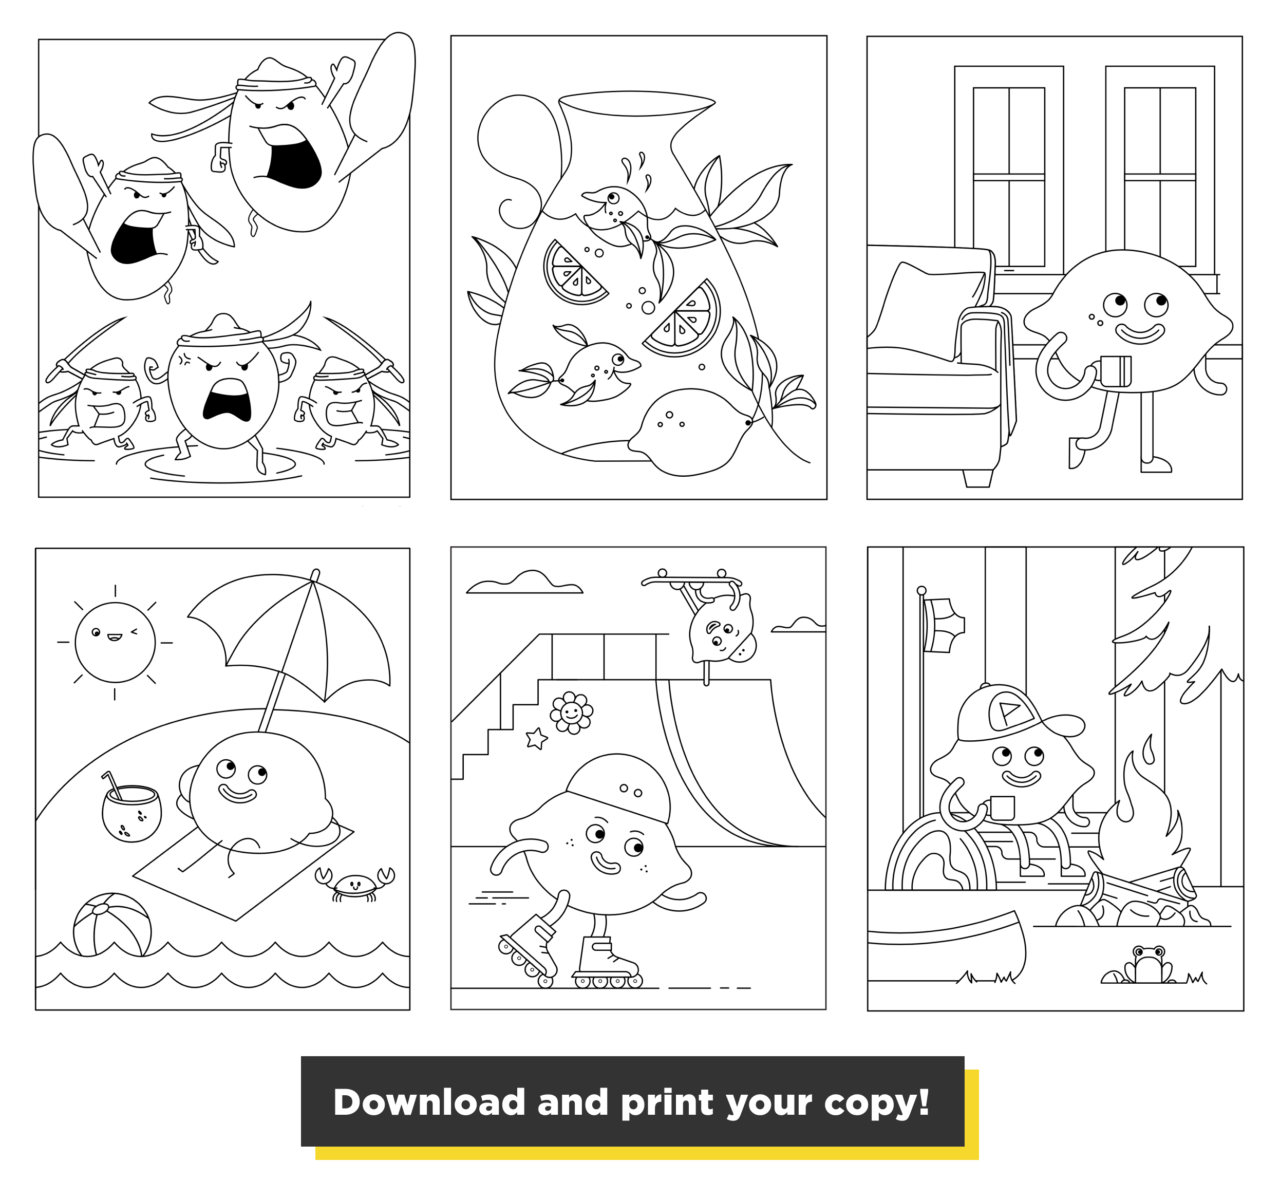 print your own coloring pages